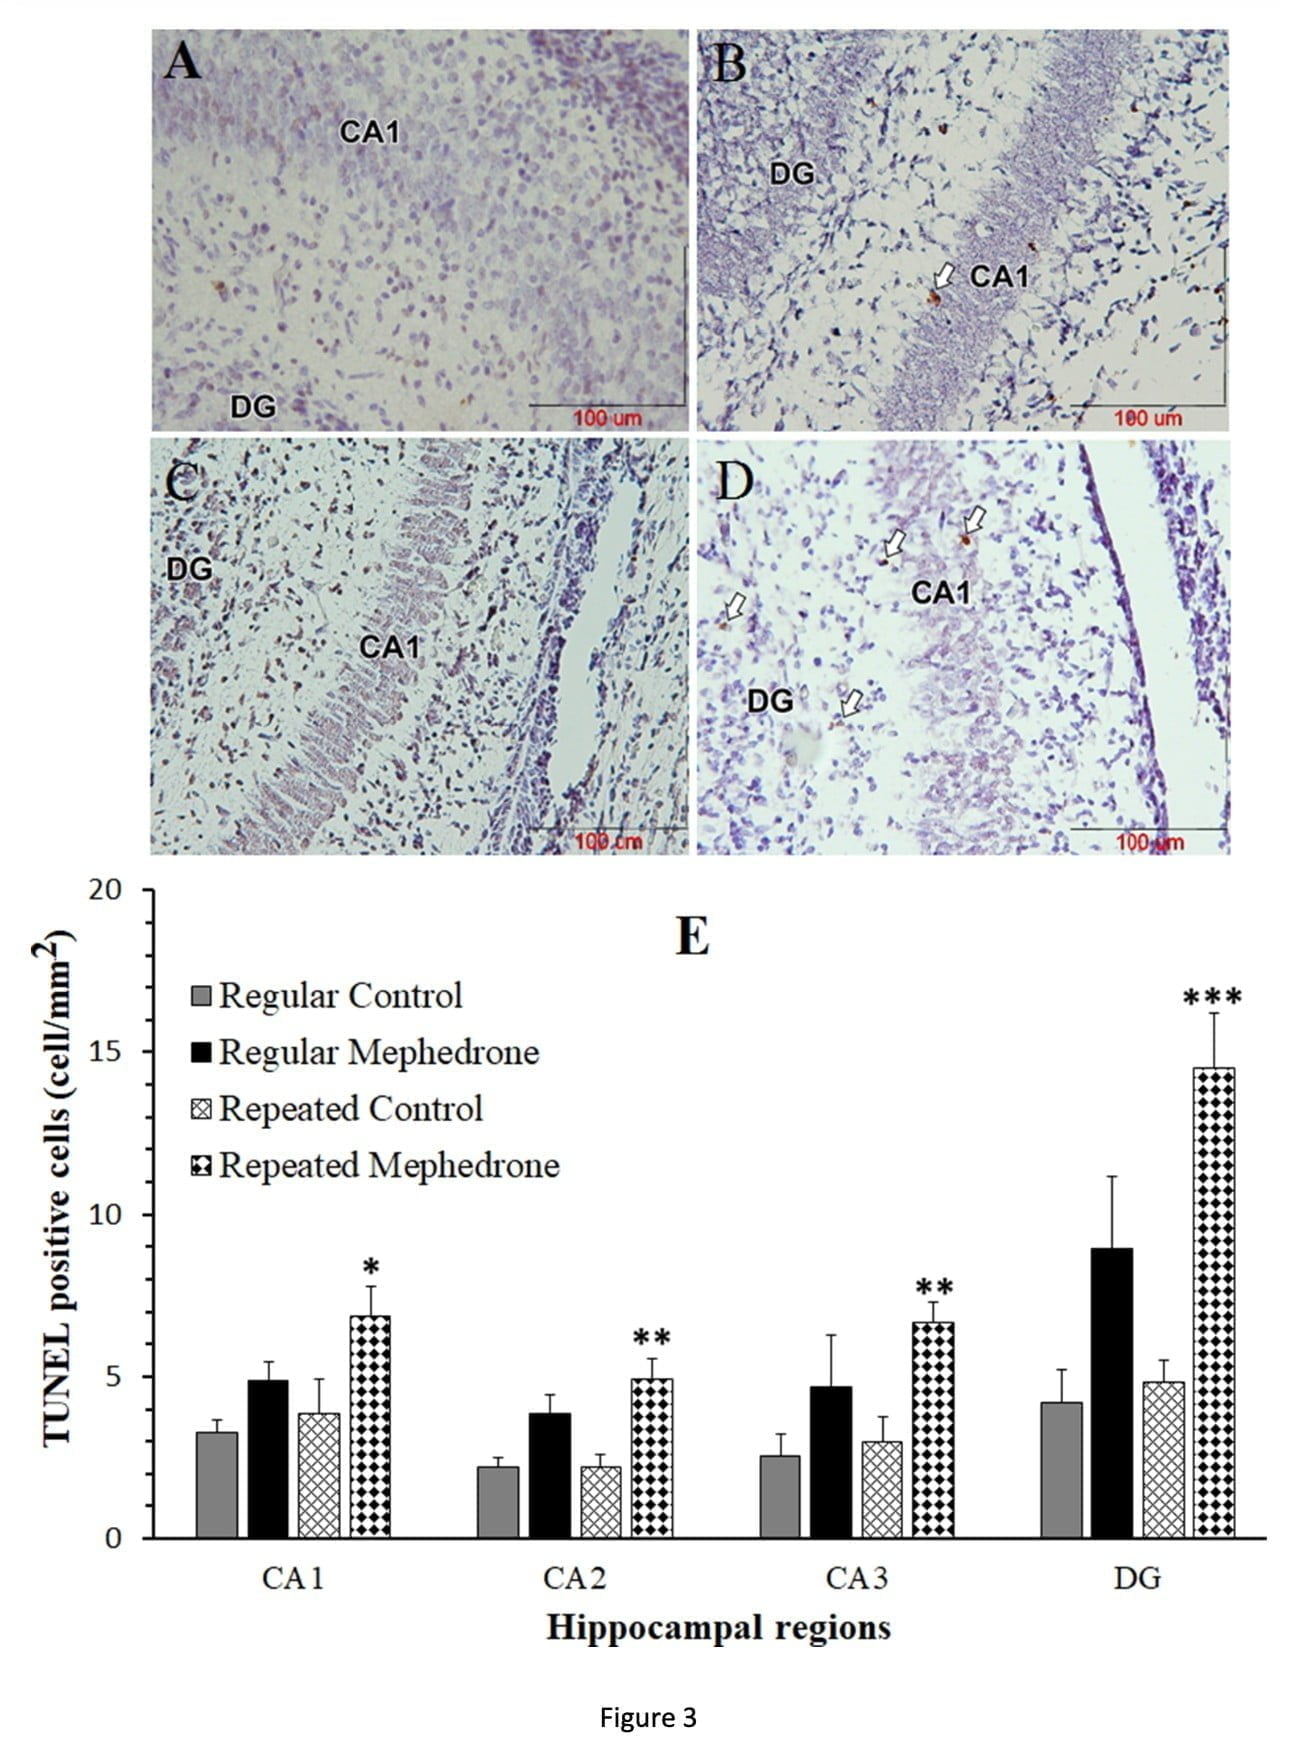 <strong>Neurotoxic effects of mephedrone in an embryo cause stillbirth or hippocampal death</strong>